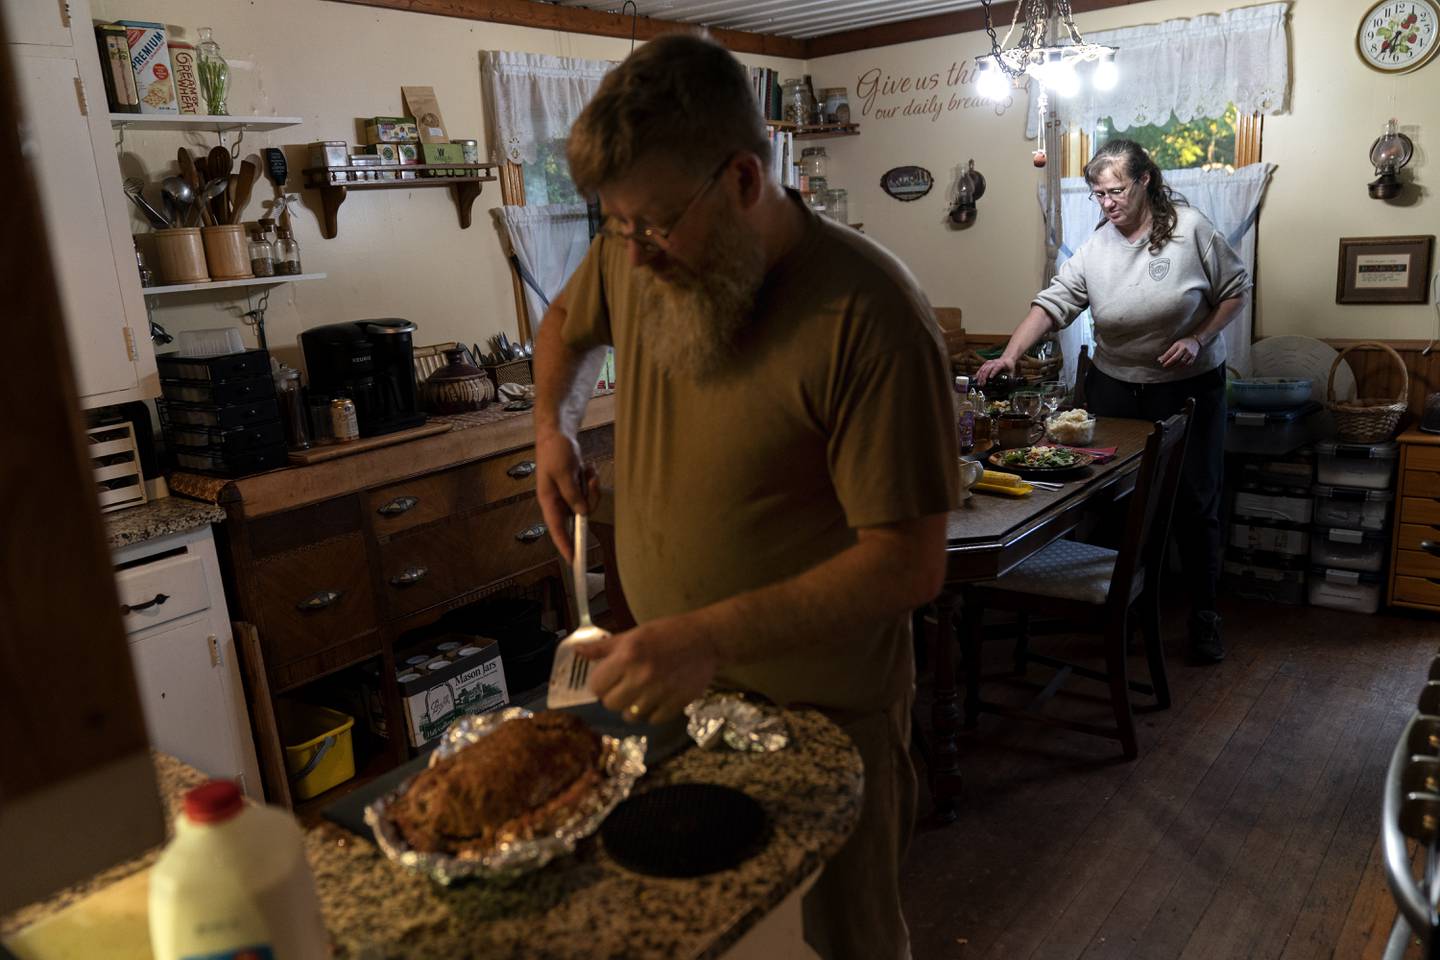 Mark Carlson serves up his home-cooked meatloaf for dinner as his wife, Linda, pours a glass of wine at their home in Hammond, Wis., Wednesday, Sept. 28, 2022. Carlson was swept into office earlier this year when insurgent right-wing conservatives created a powerful local voting bloc, energized by fury over COVID lockdowns, vaccination mandates and the unrest that shook the country after George Floyd was murdered by a police officer in Minneapolis, just 45 minutes away. (AP Photo/David Goldman)